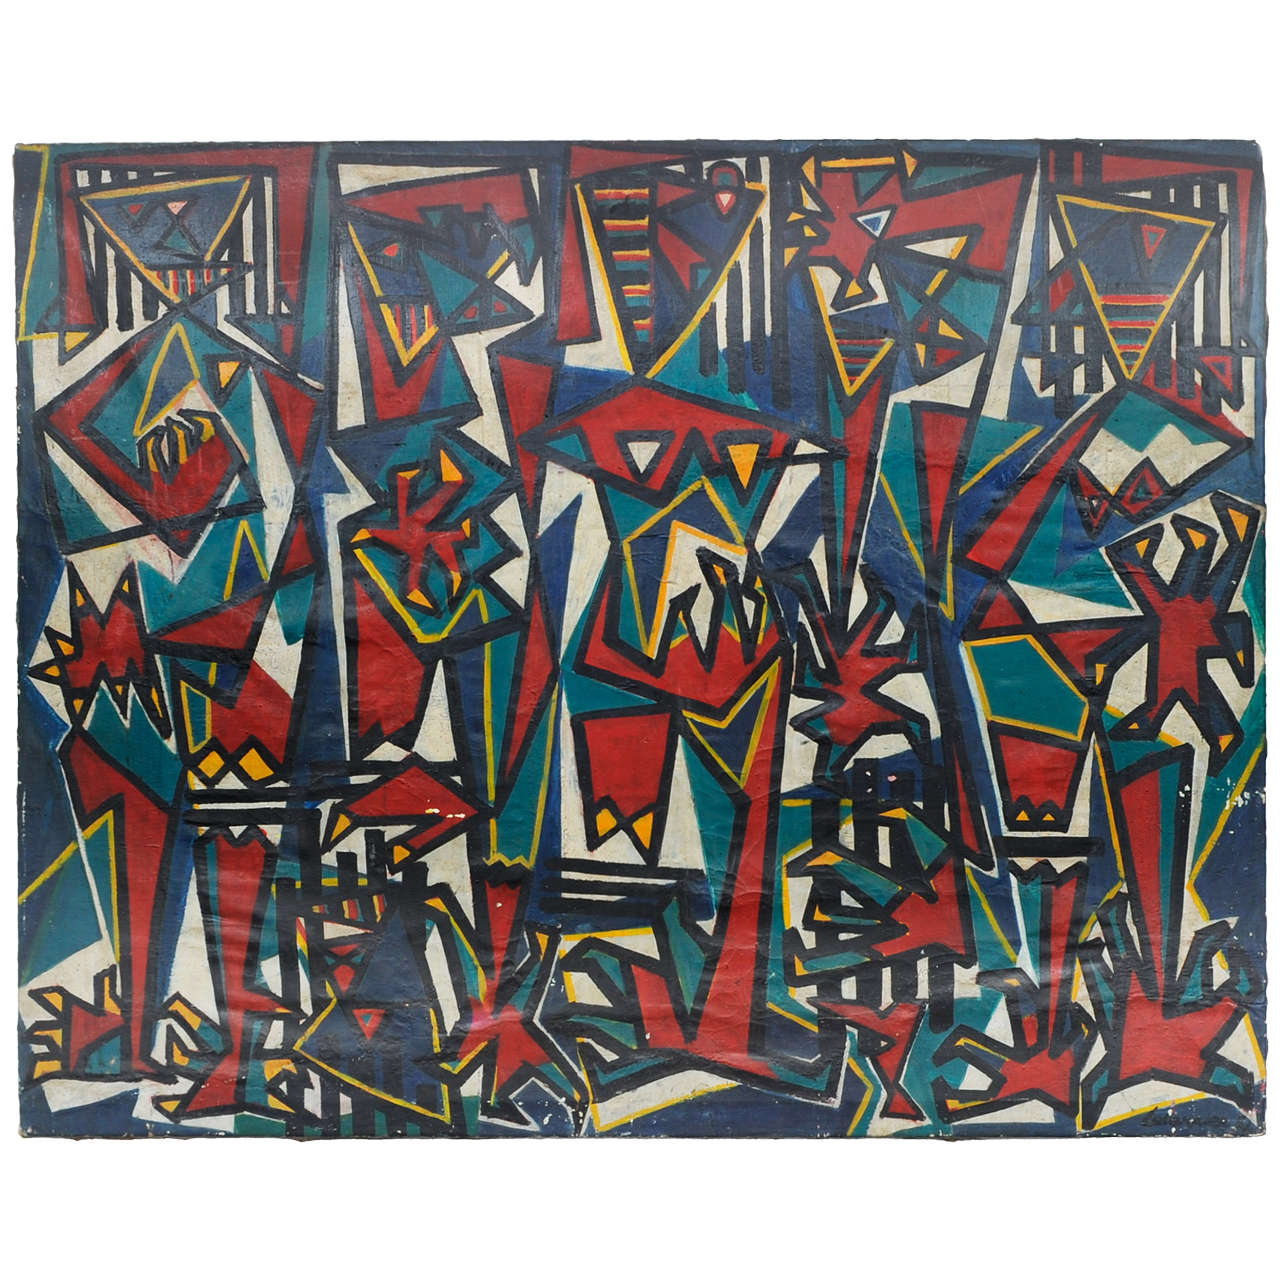 Extra Large Painting By Leterrier, 1952 For Sale